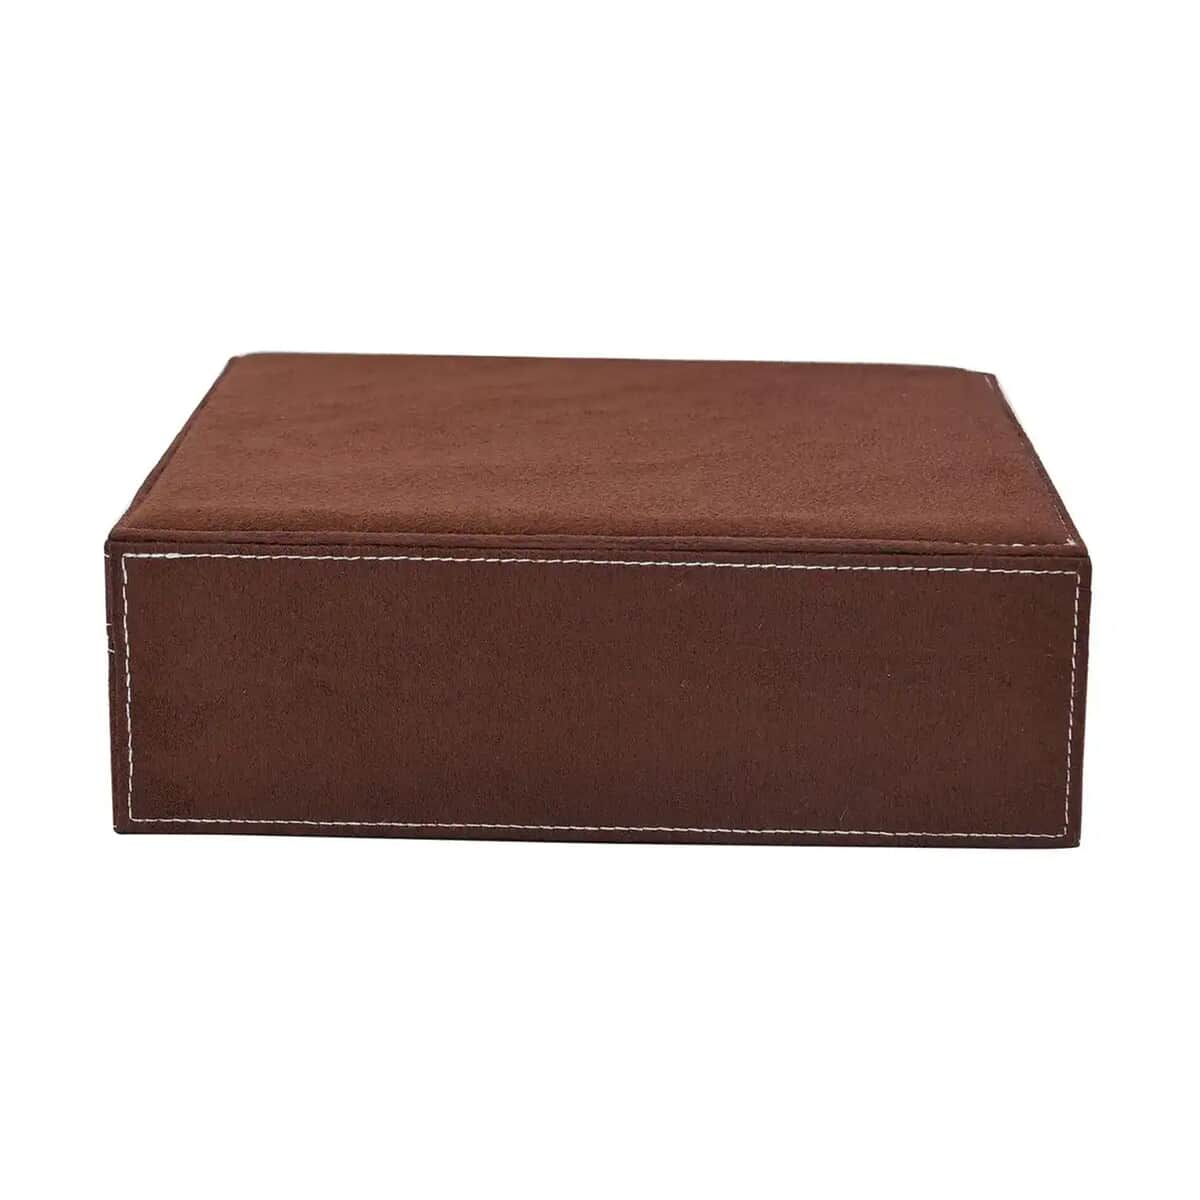 Brown Faux Velvet Briefcase Style 2-tier Jewelry Box, Scratch resistant and Anti-Tarnish Jewelry Storage Box, Anti Tarnish Jewelry Case, Jewelry Organizer (Approx 60 Rings, etc.) image number 5